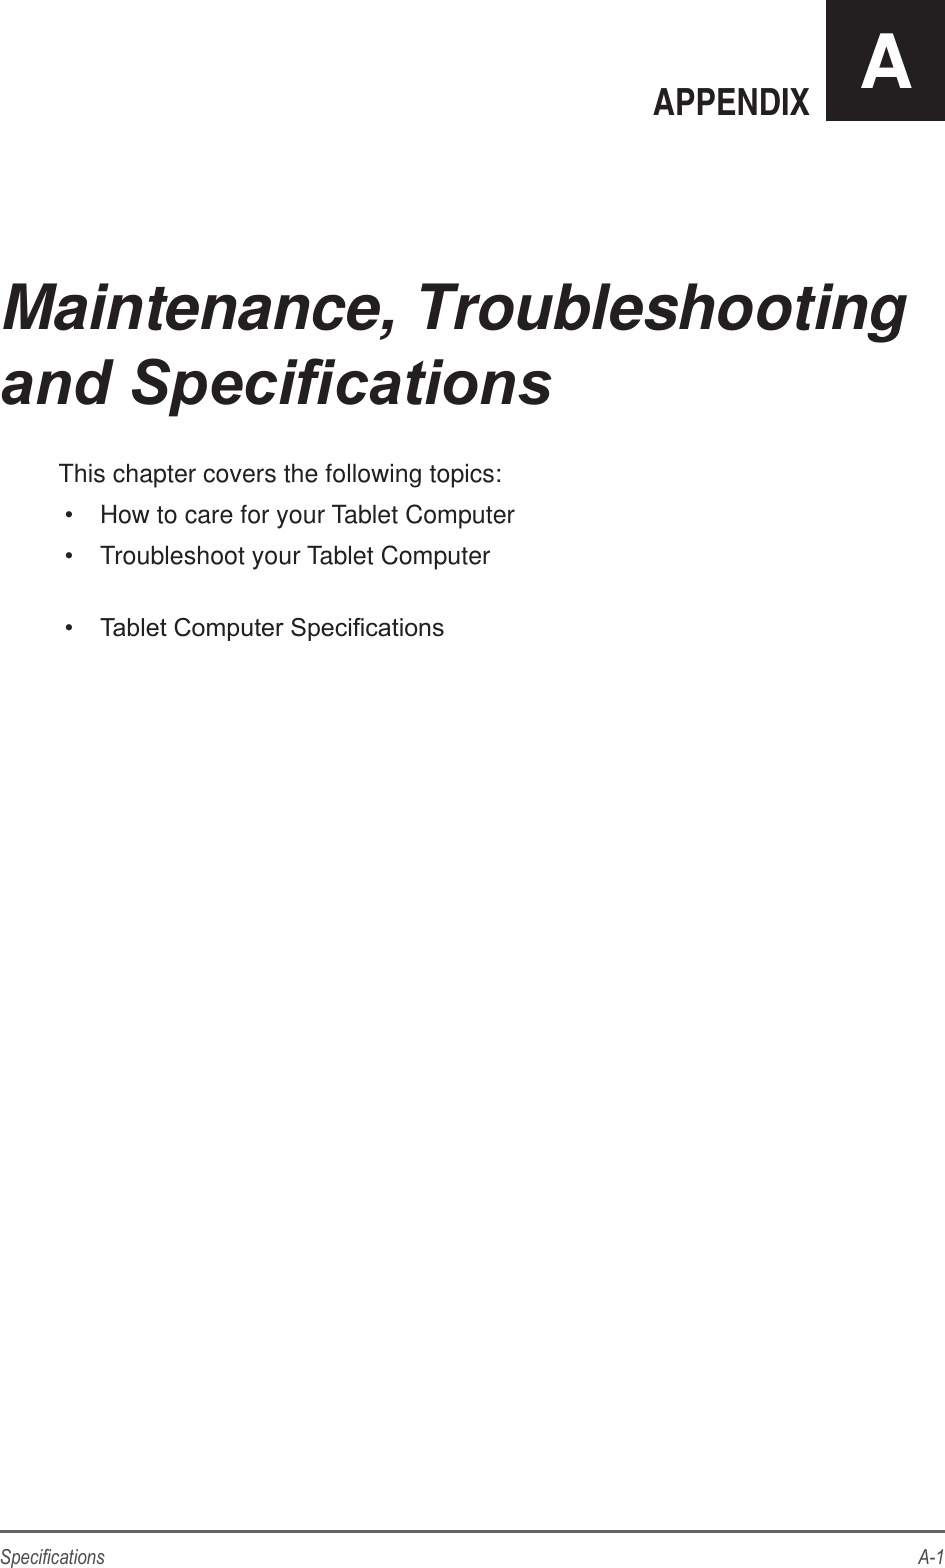 A-1SpecicationsAPPENDIX AThis chapter covers the following topics:•  How to care for your Tablet Computer•  Troubleshoot your Tablet Computer•  Tablet Computer SpecicationsMaintenance, Troubleshooting and Specications